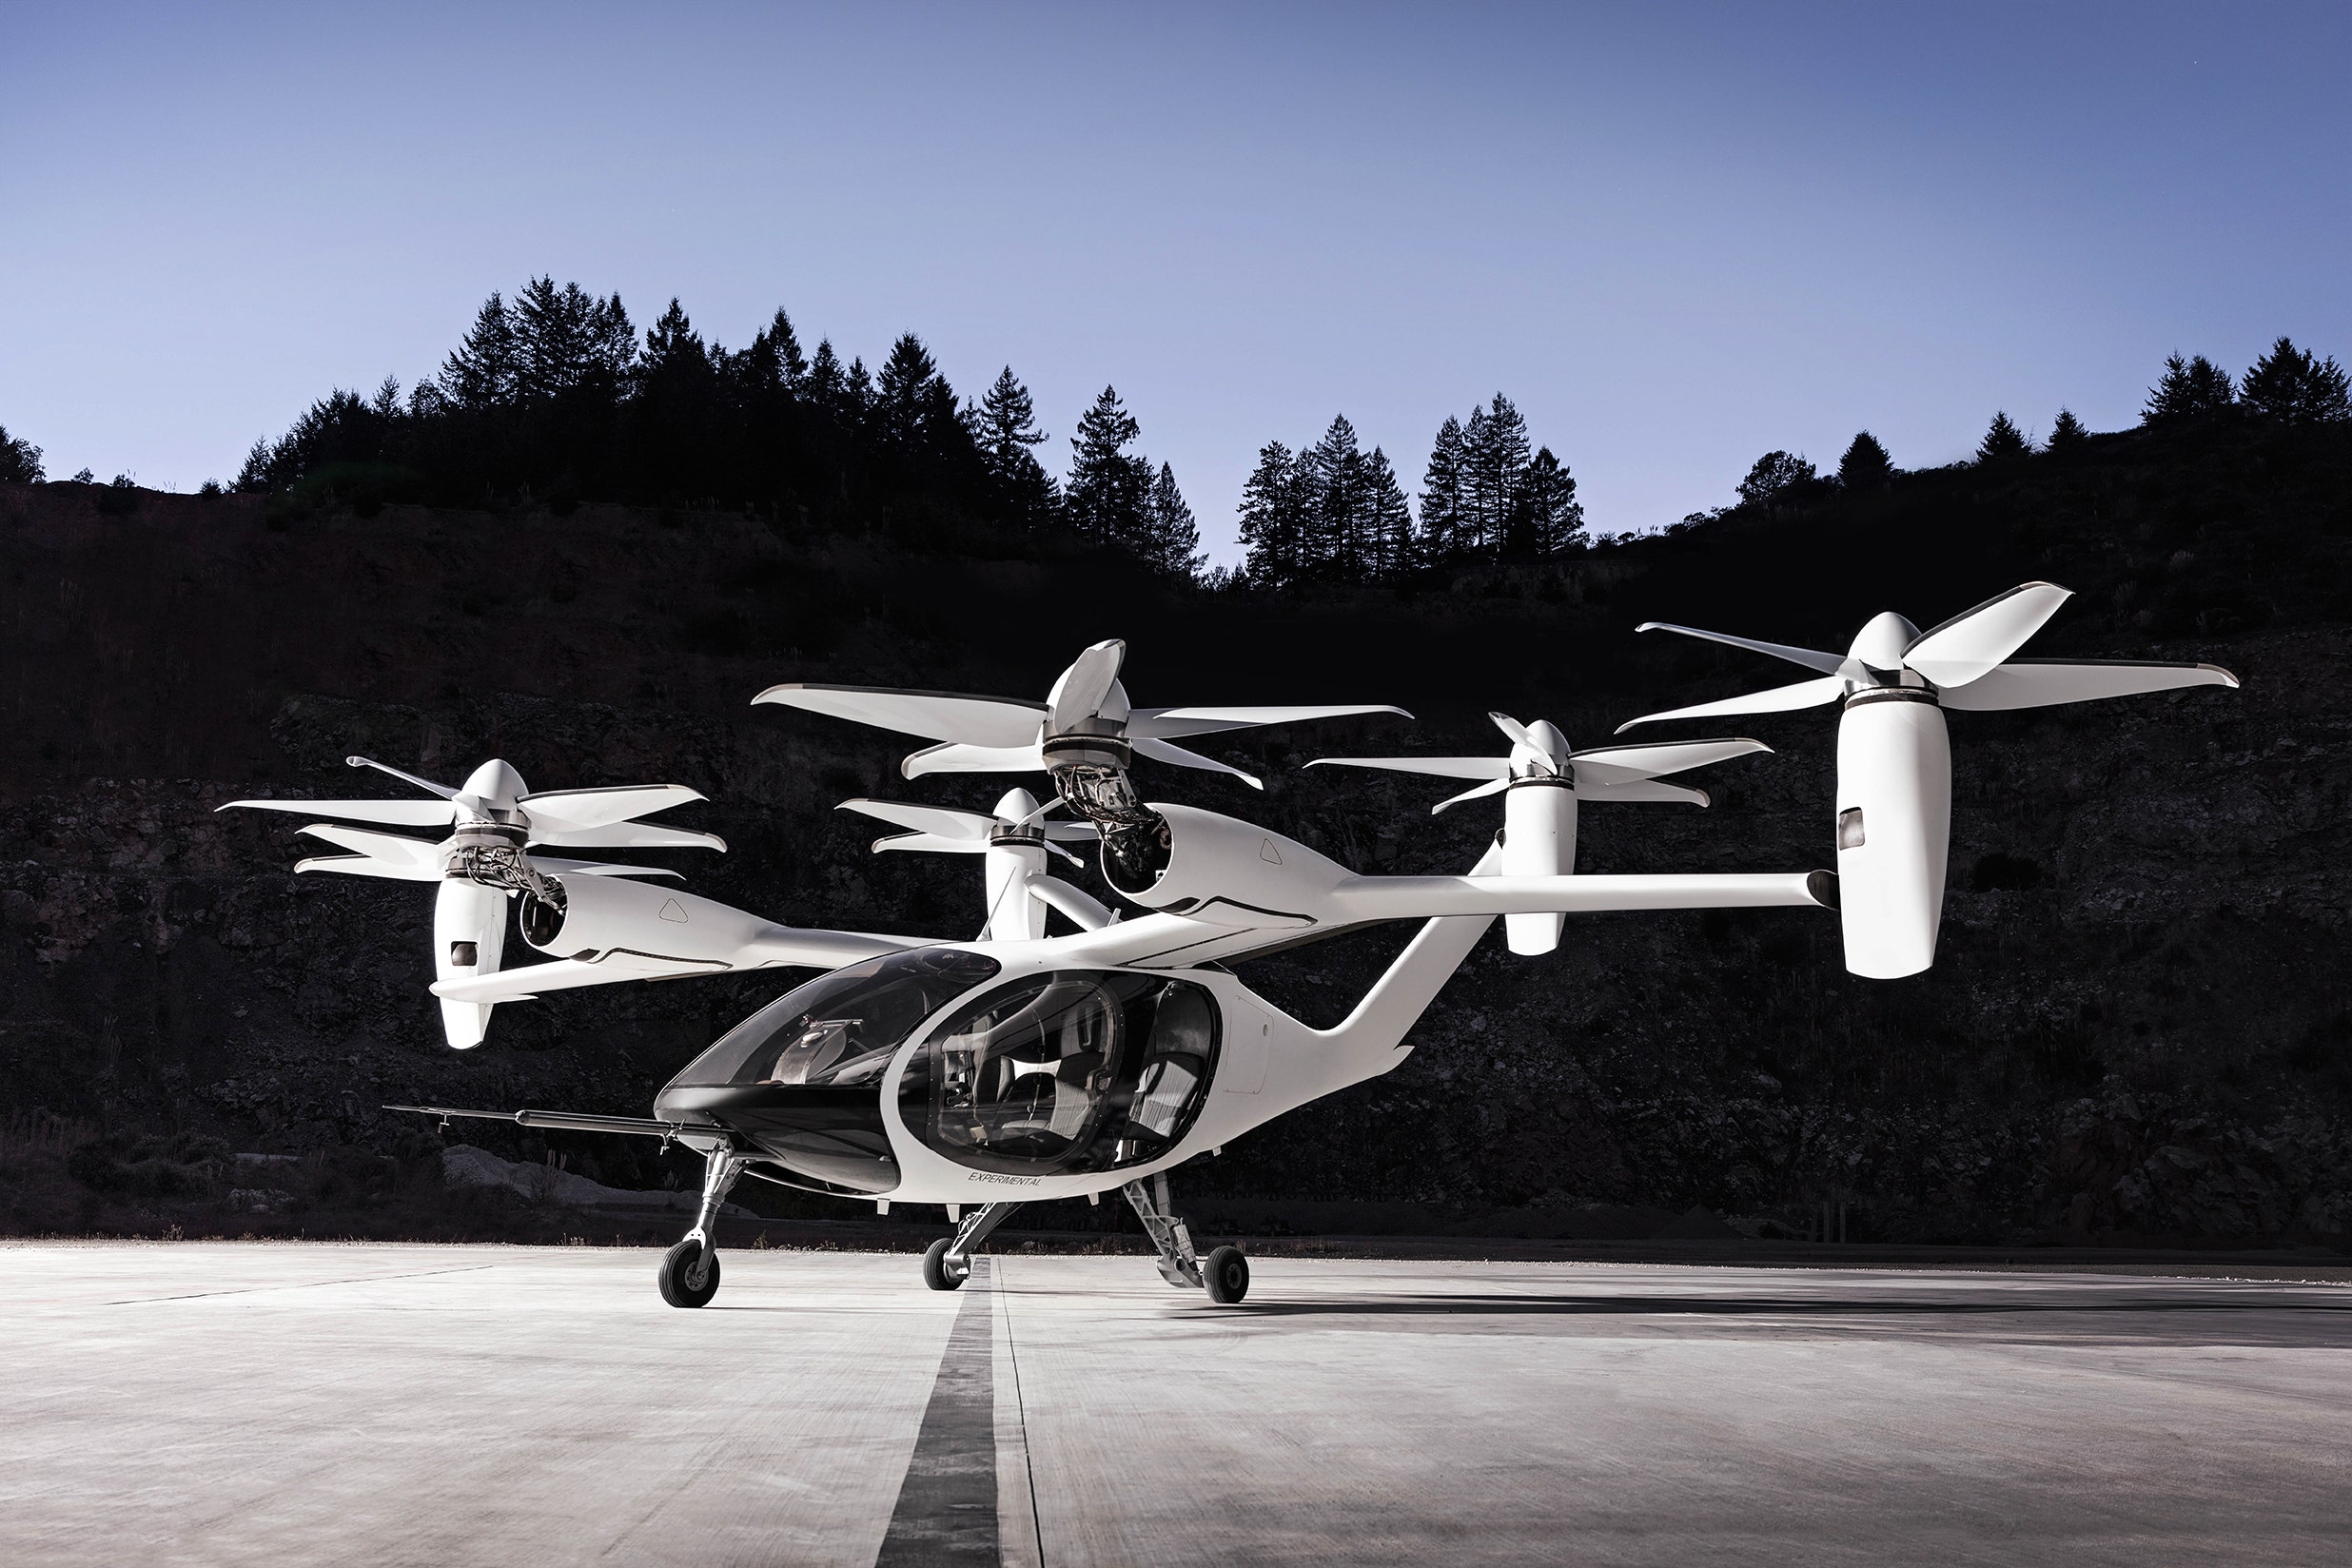 Joby's electric flying taxi completes 150-mile flight